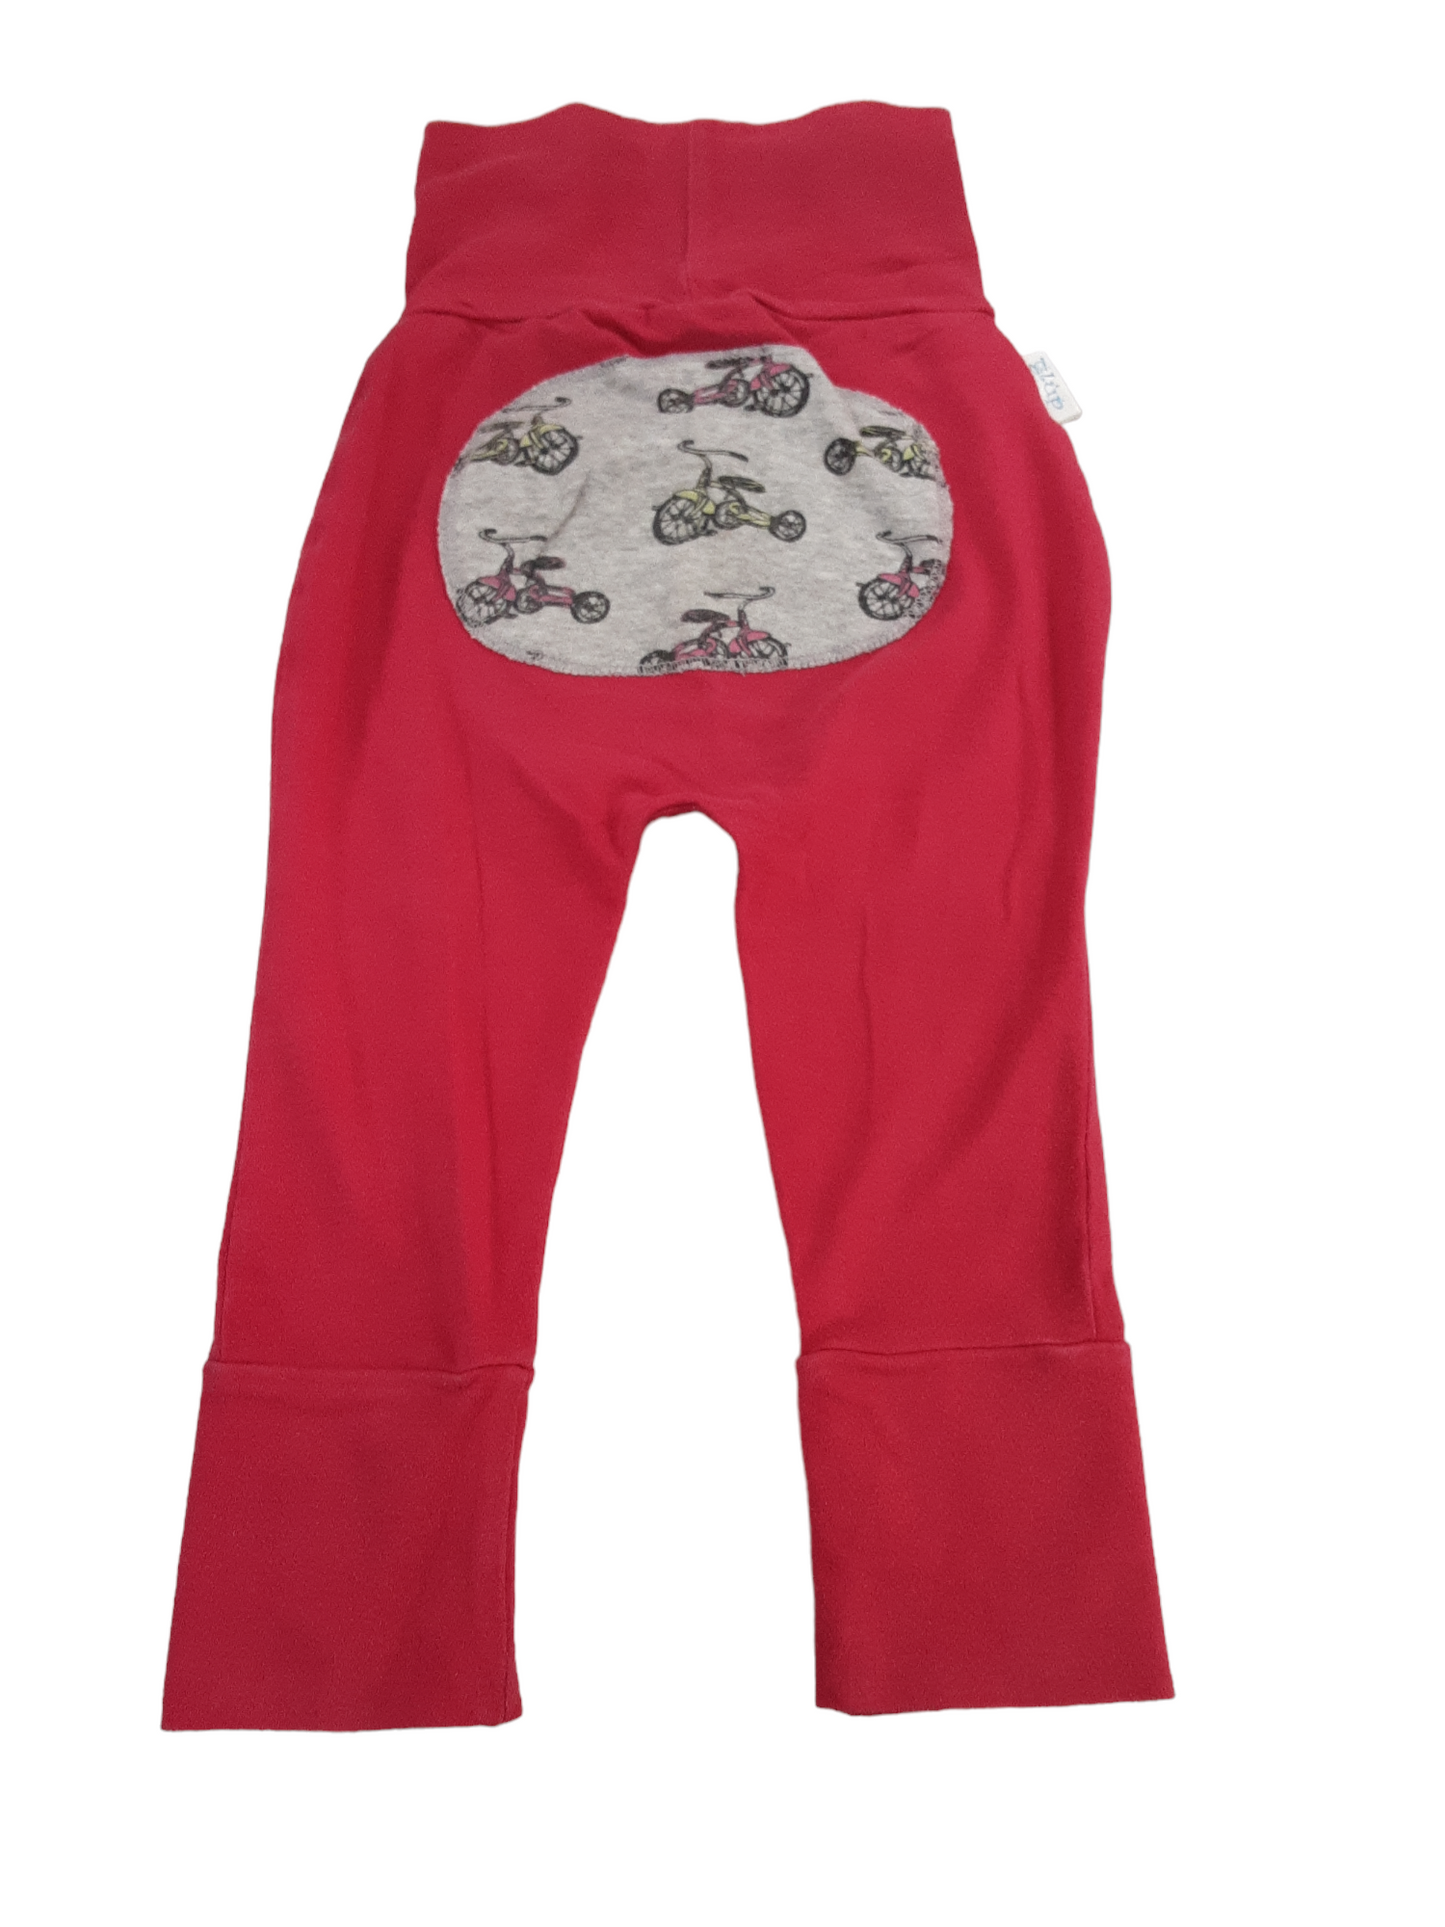 Grow pants size 18months-36months